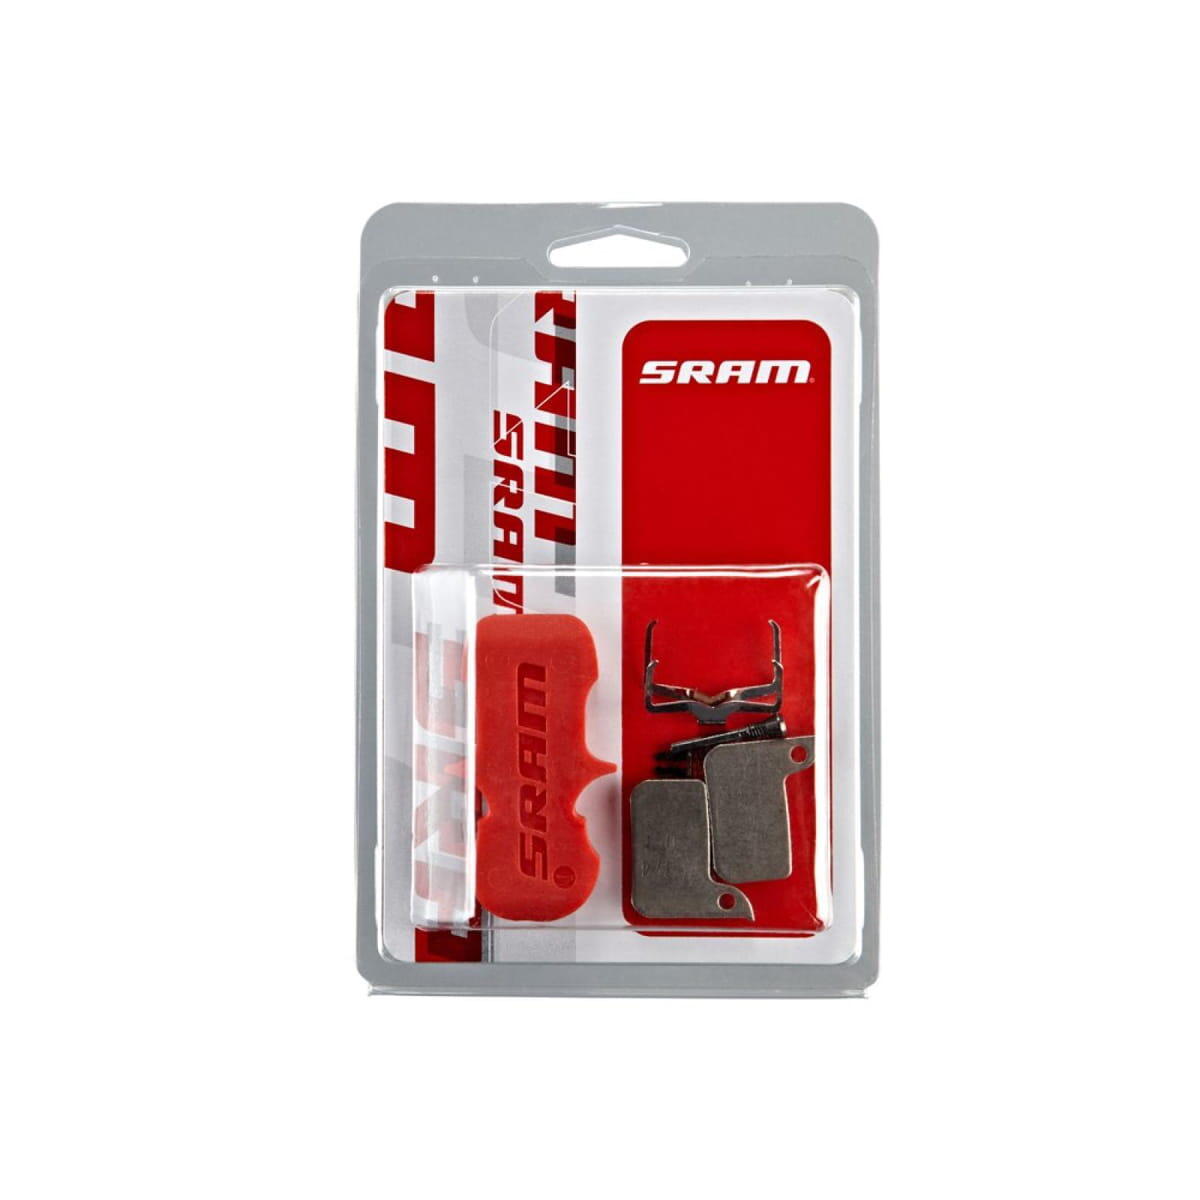 SRAM HRD Road Disc Brake Pads Sintered for Level/Force/Red AXS 1/3